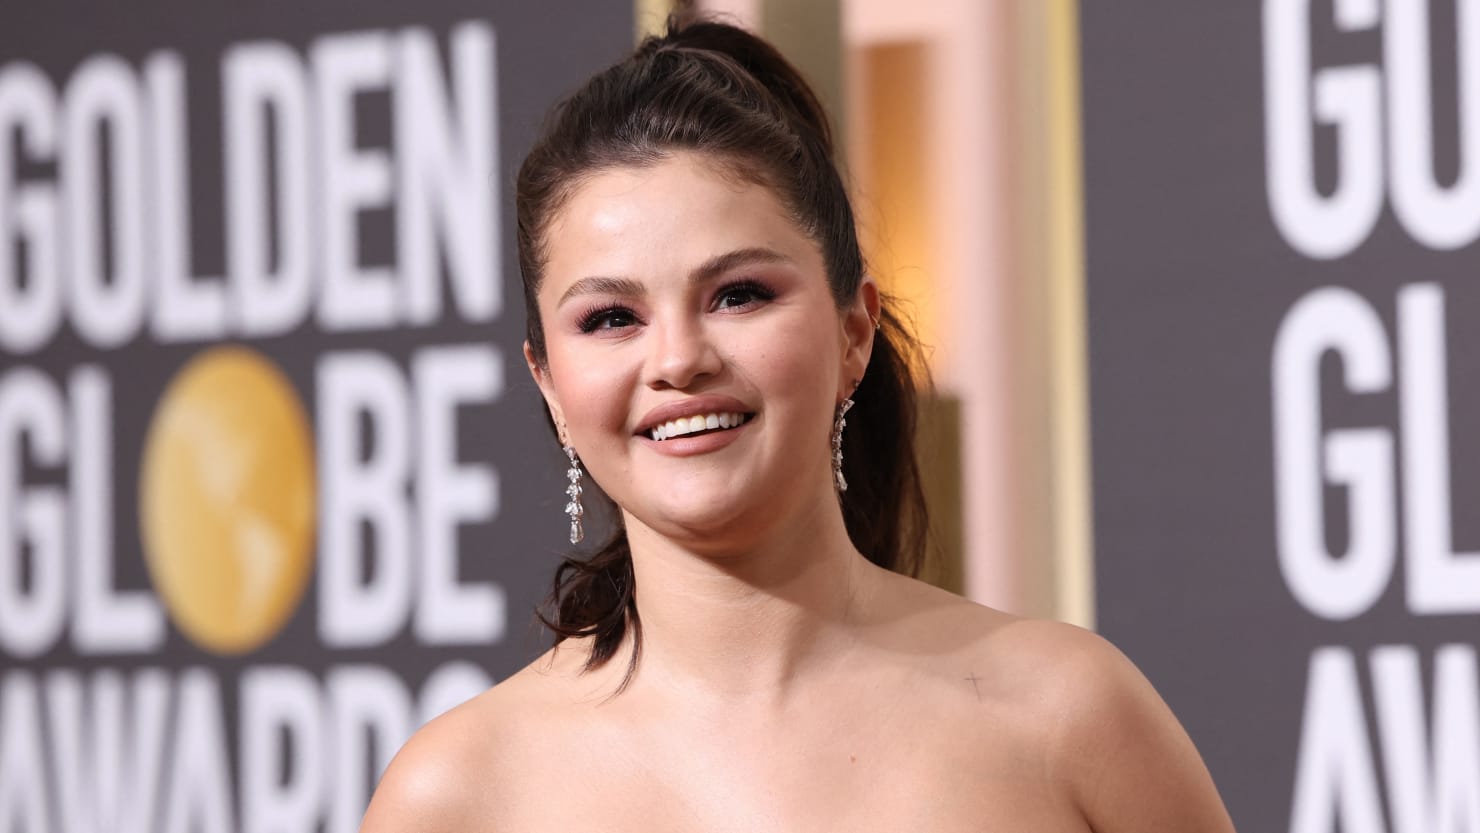 Selena Gomez Defends Hailey Bieber From Death Threats: ‘I Want This To Stop All’